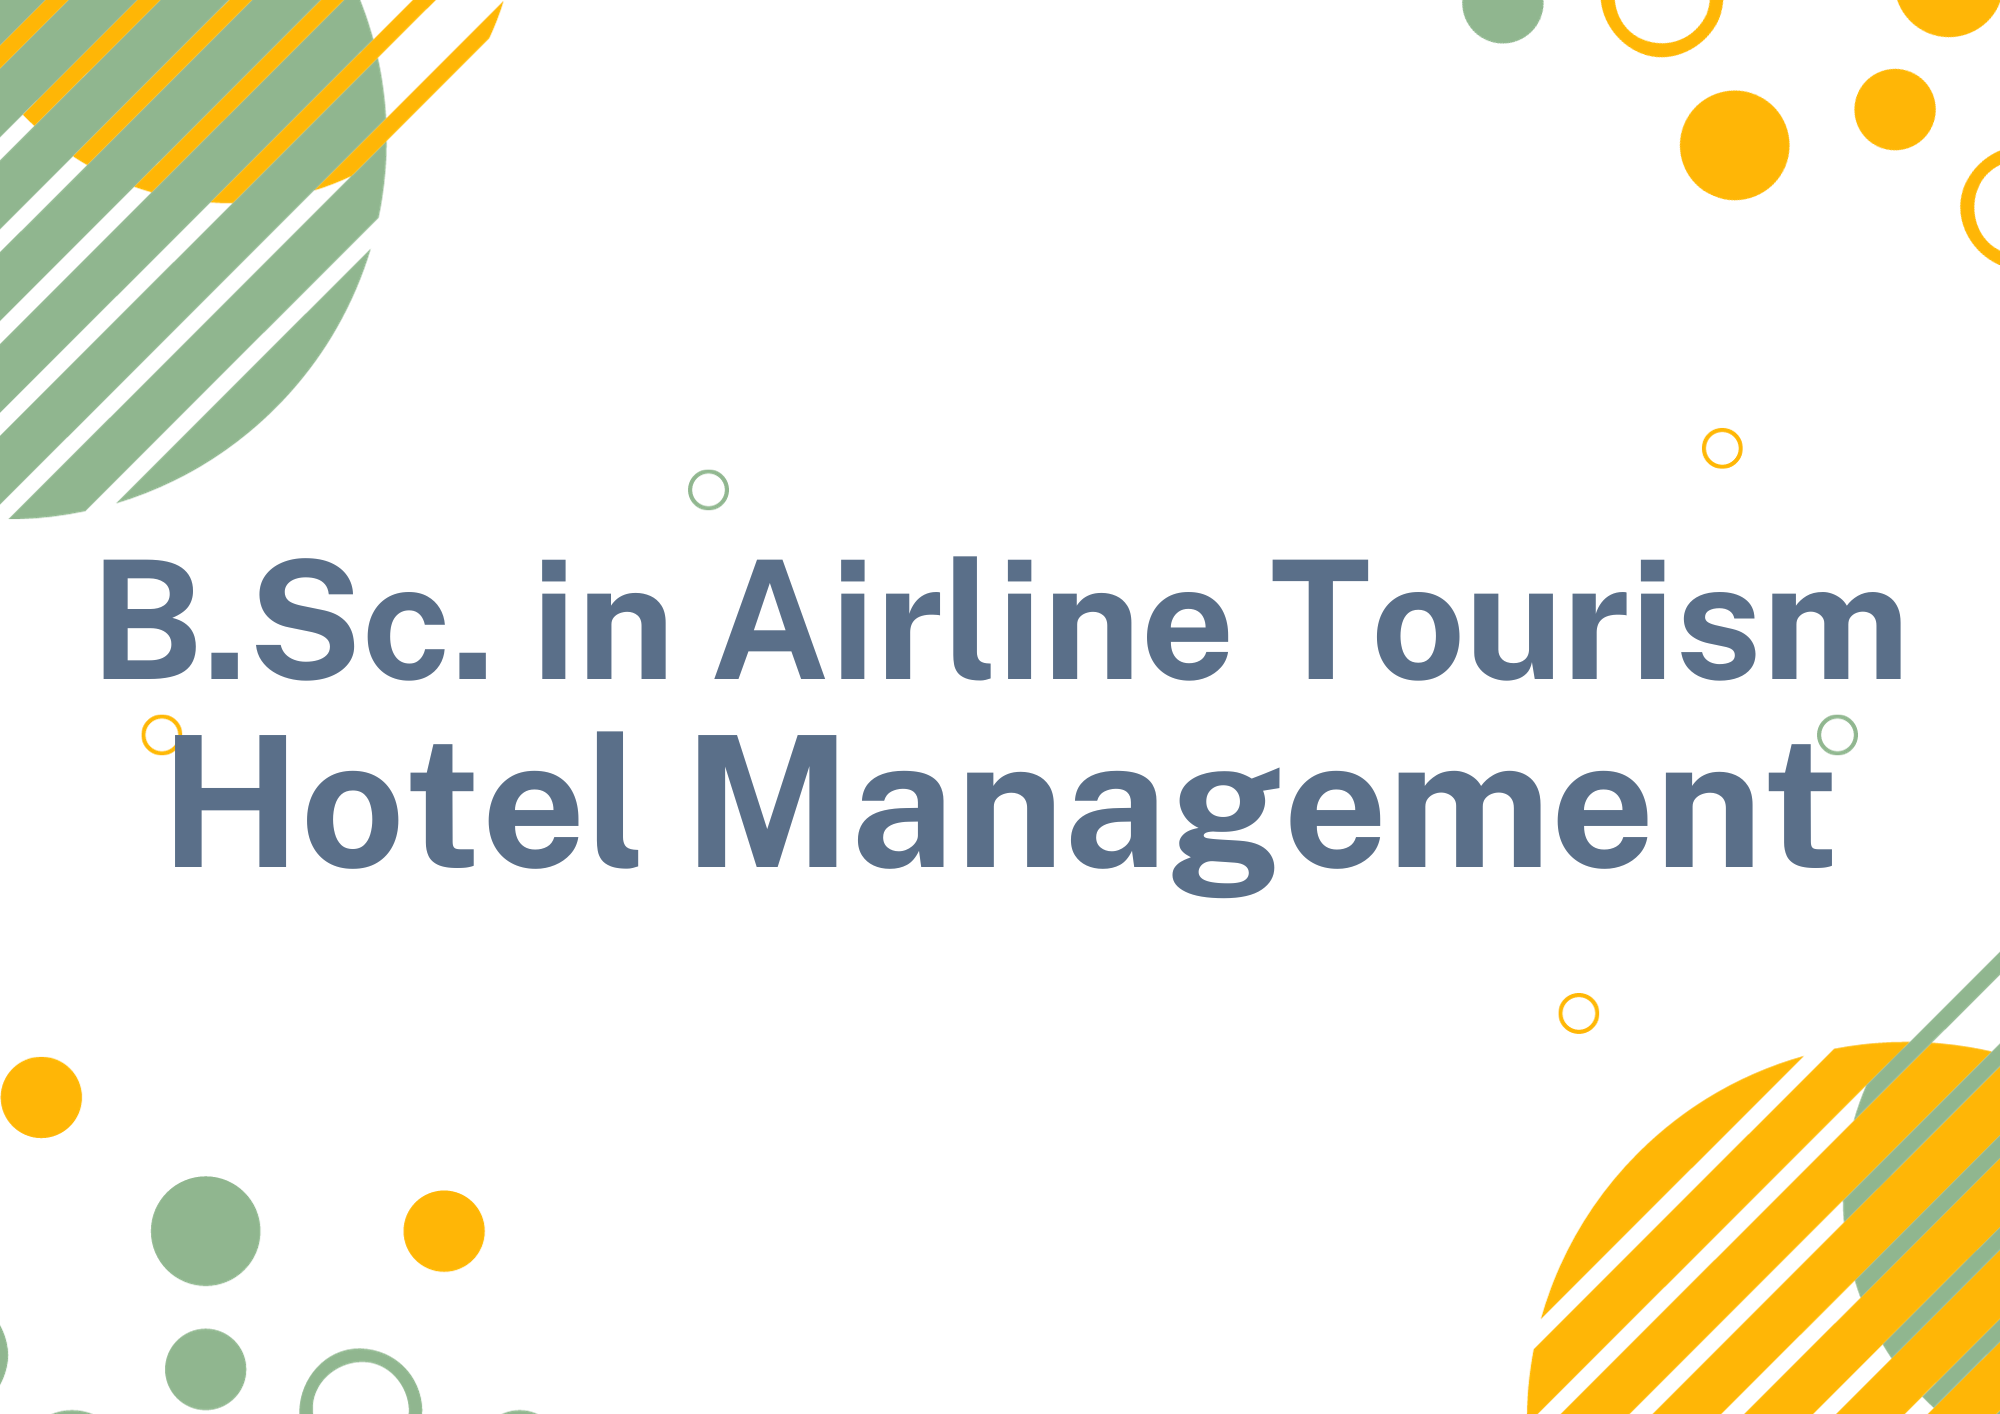 B.Sc. in Airline Tourism and Hospitality Management